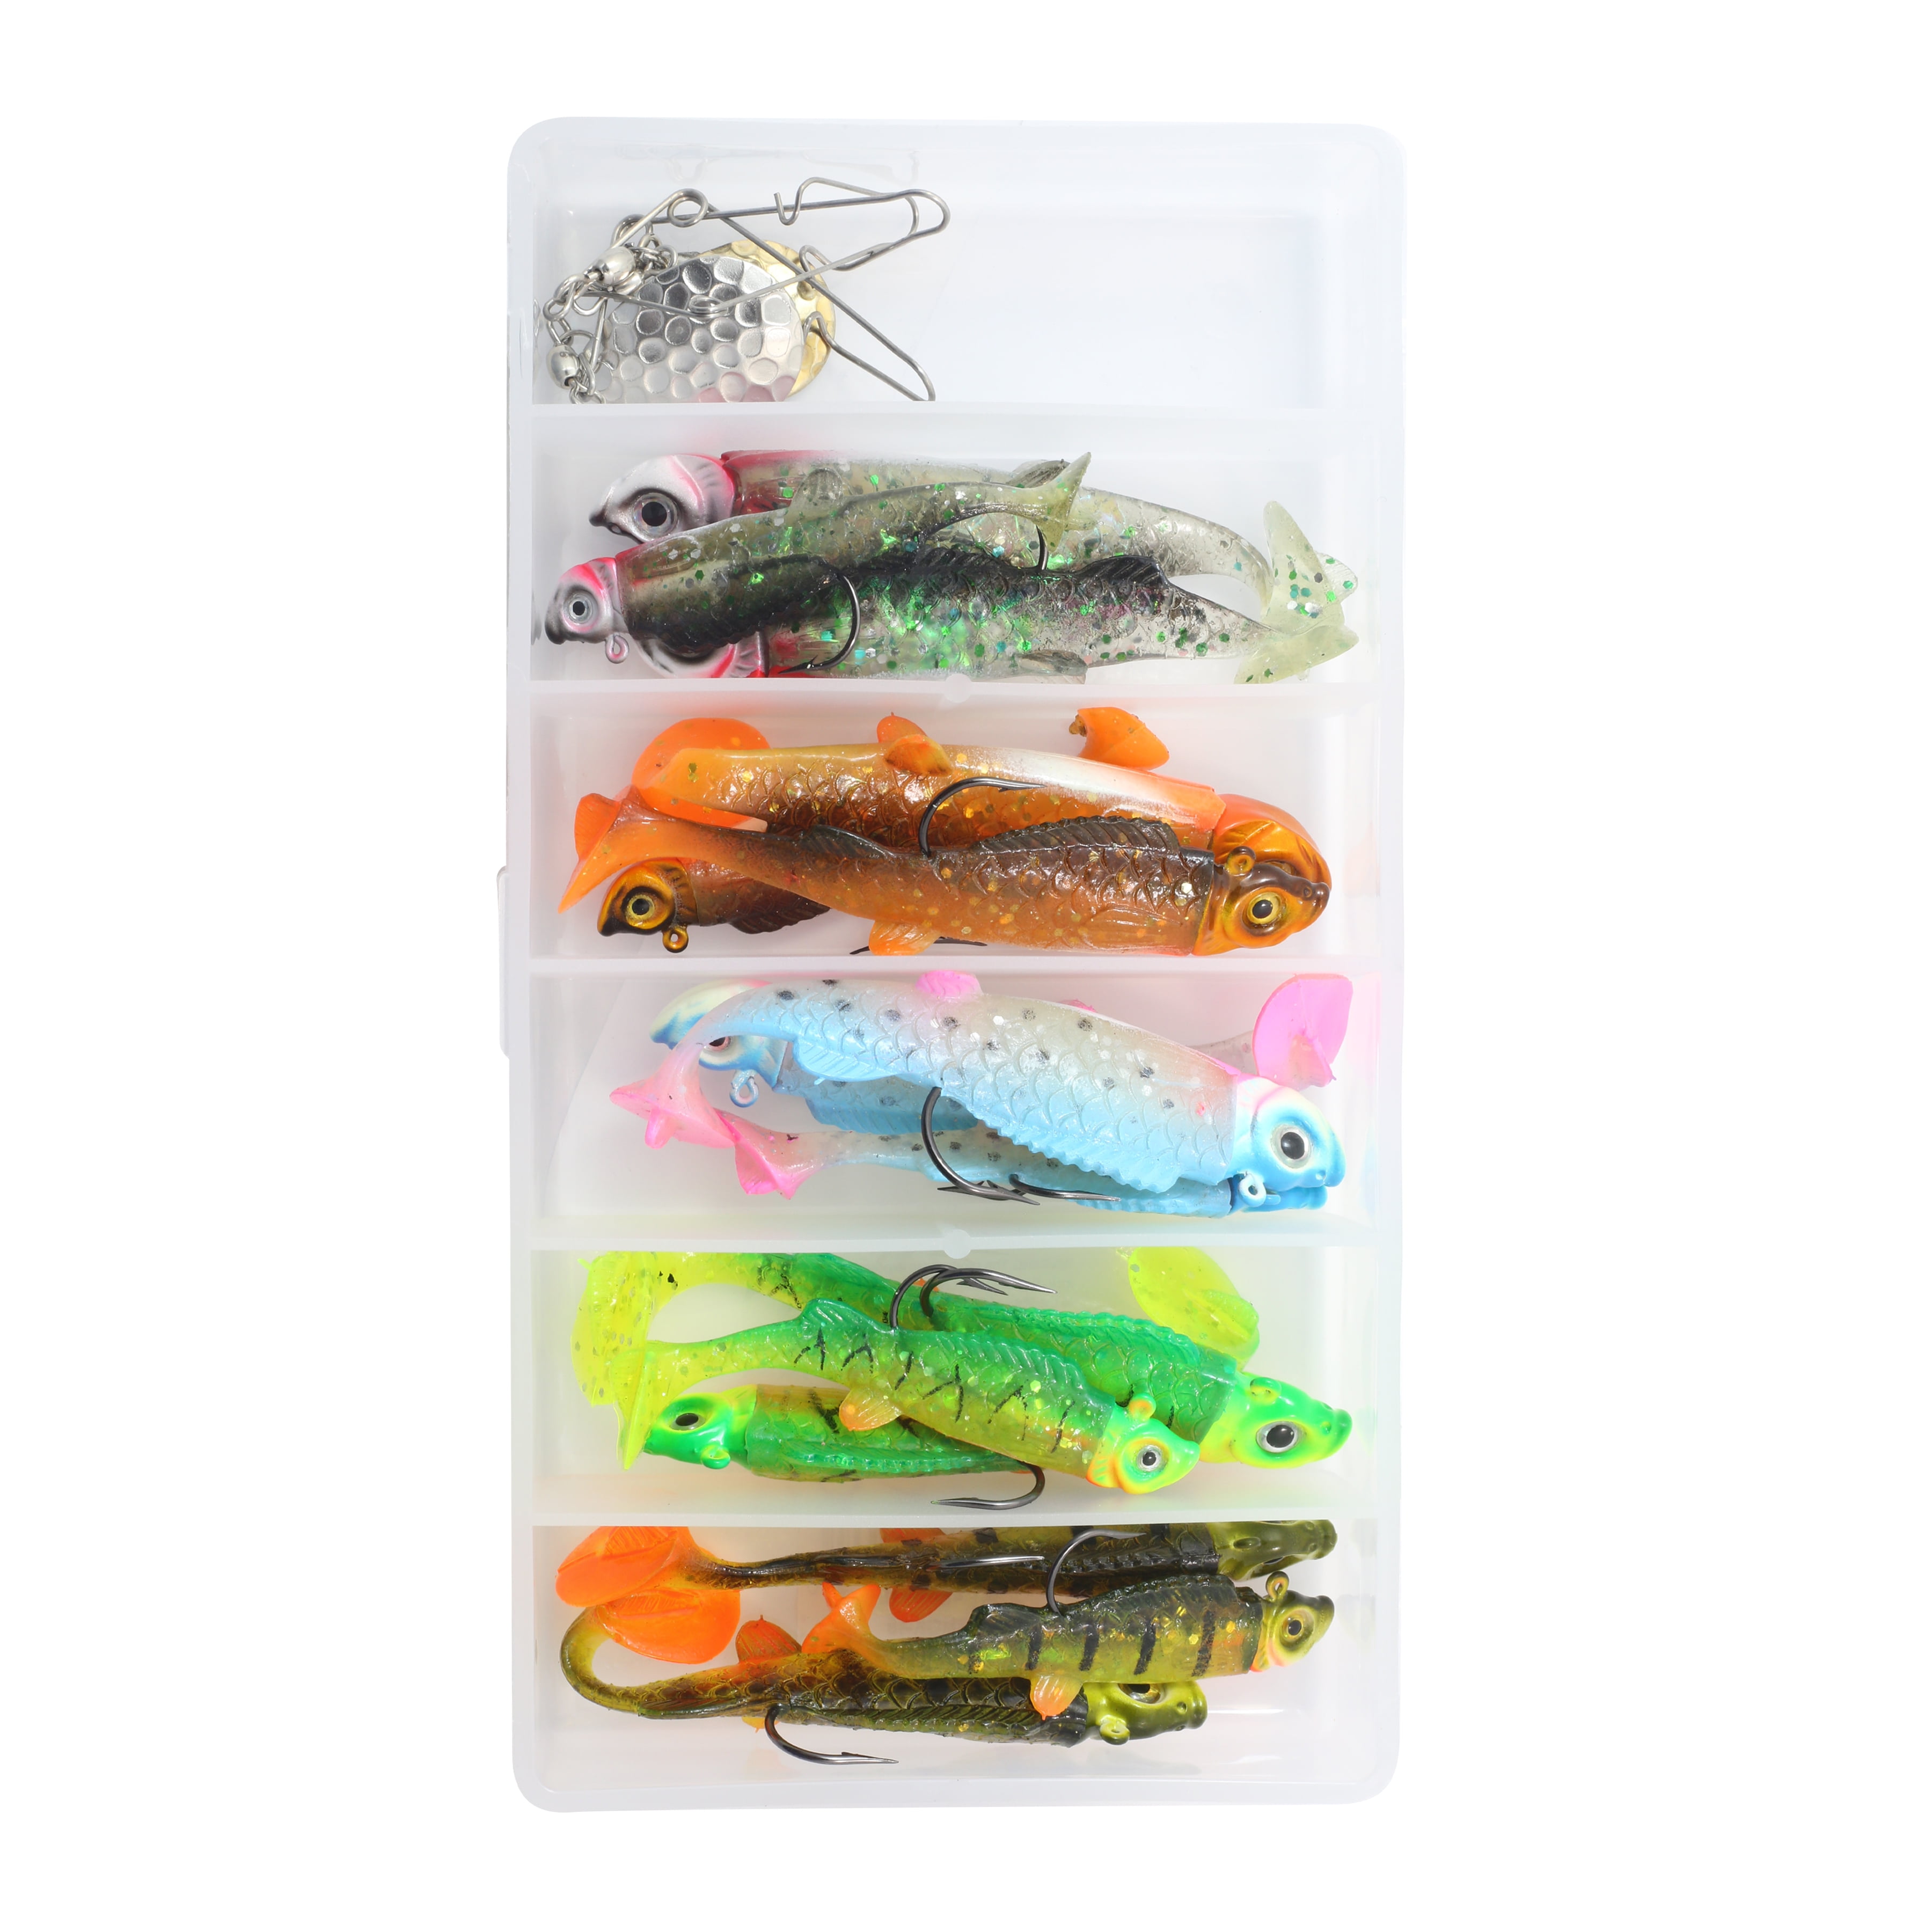 Northland Tackle Mimic Minnow Gamefish Kit, Freshwater, Assorted 